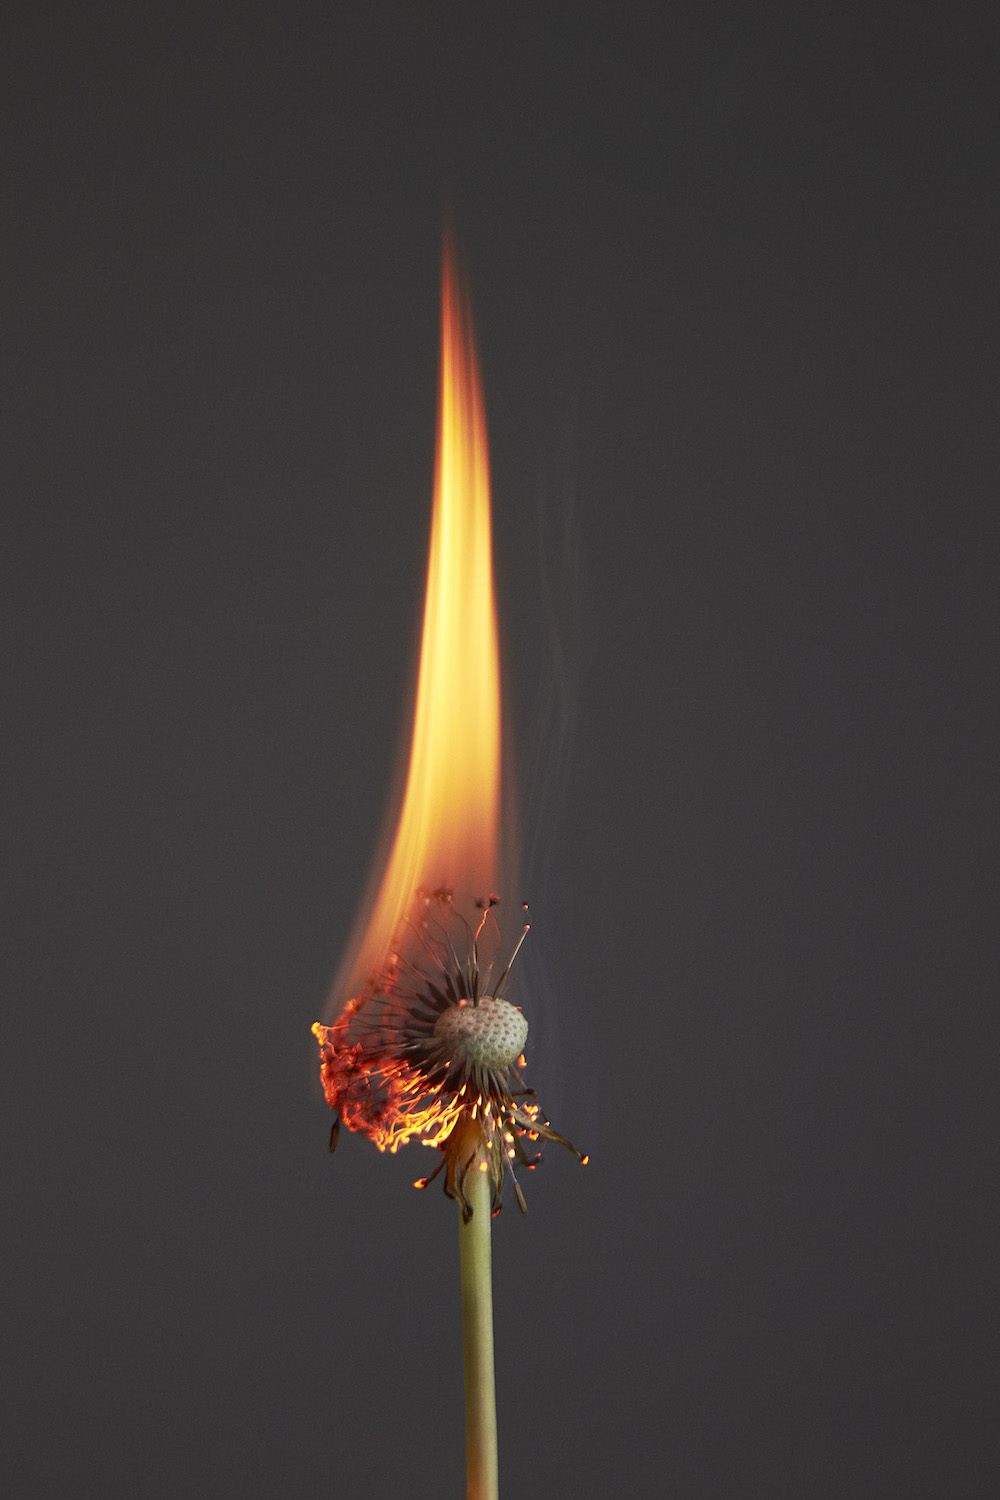 A flaming dandelion from Rankin's lockdown project An Exploding World. Image: Rankin